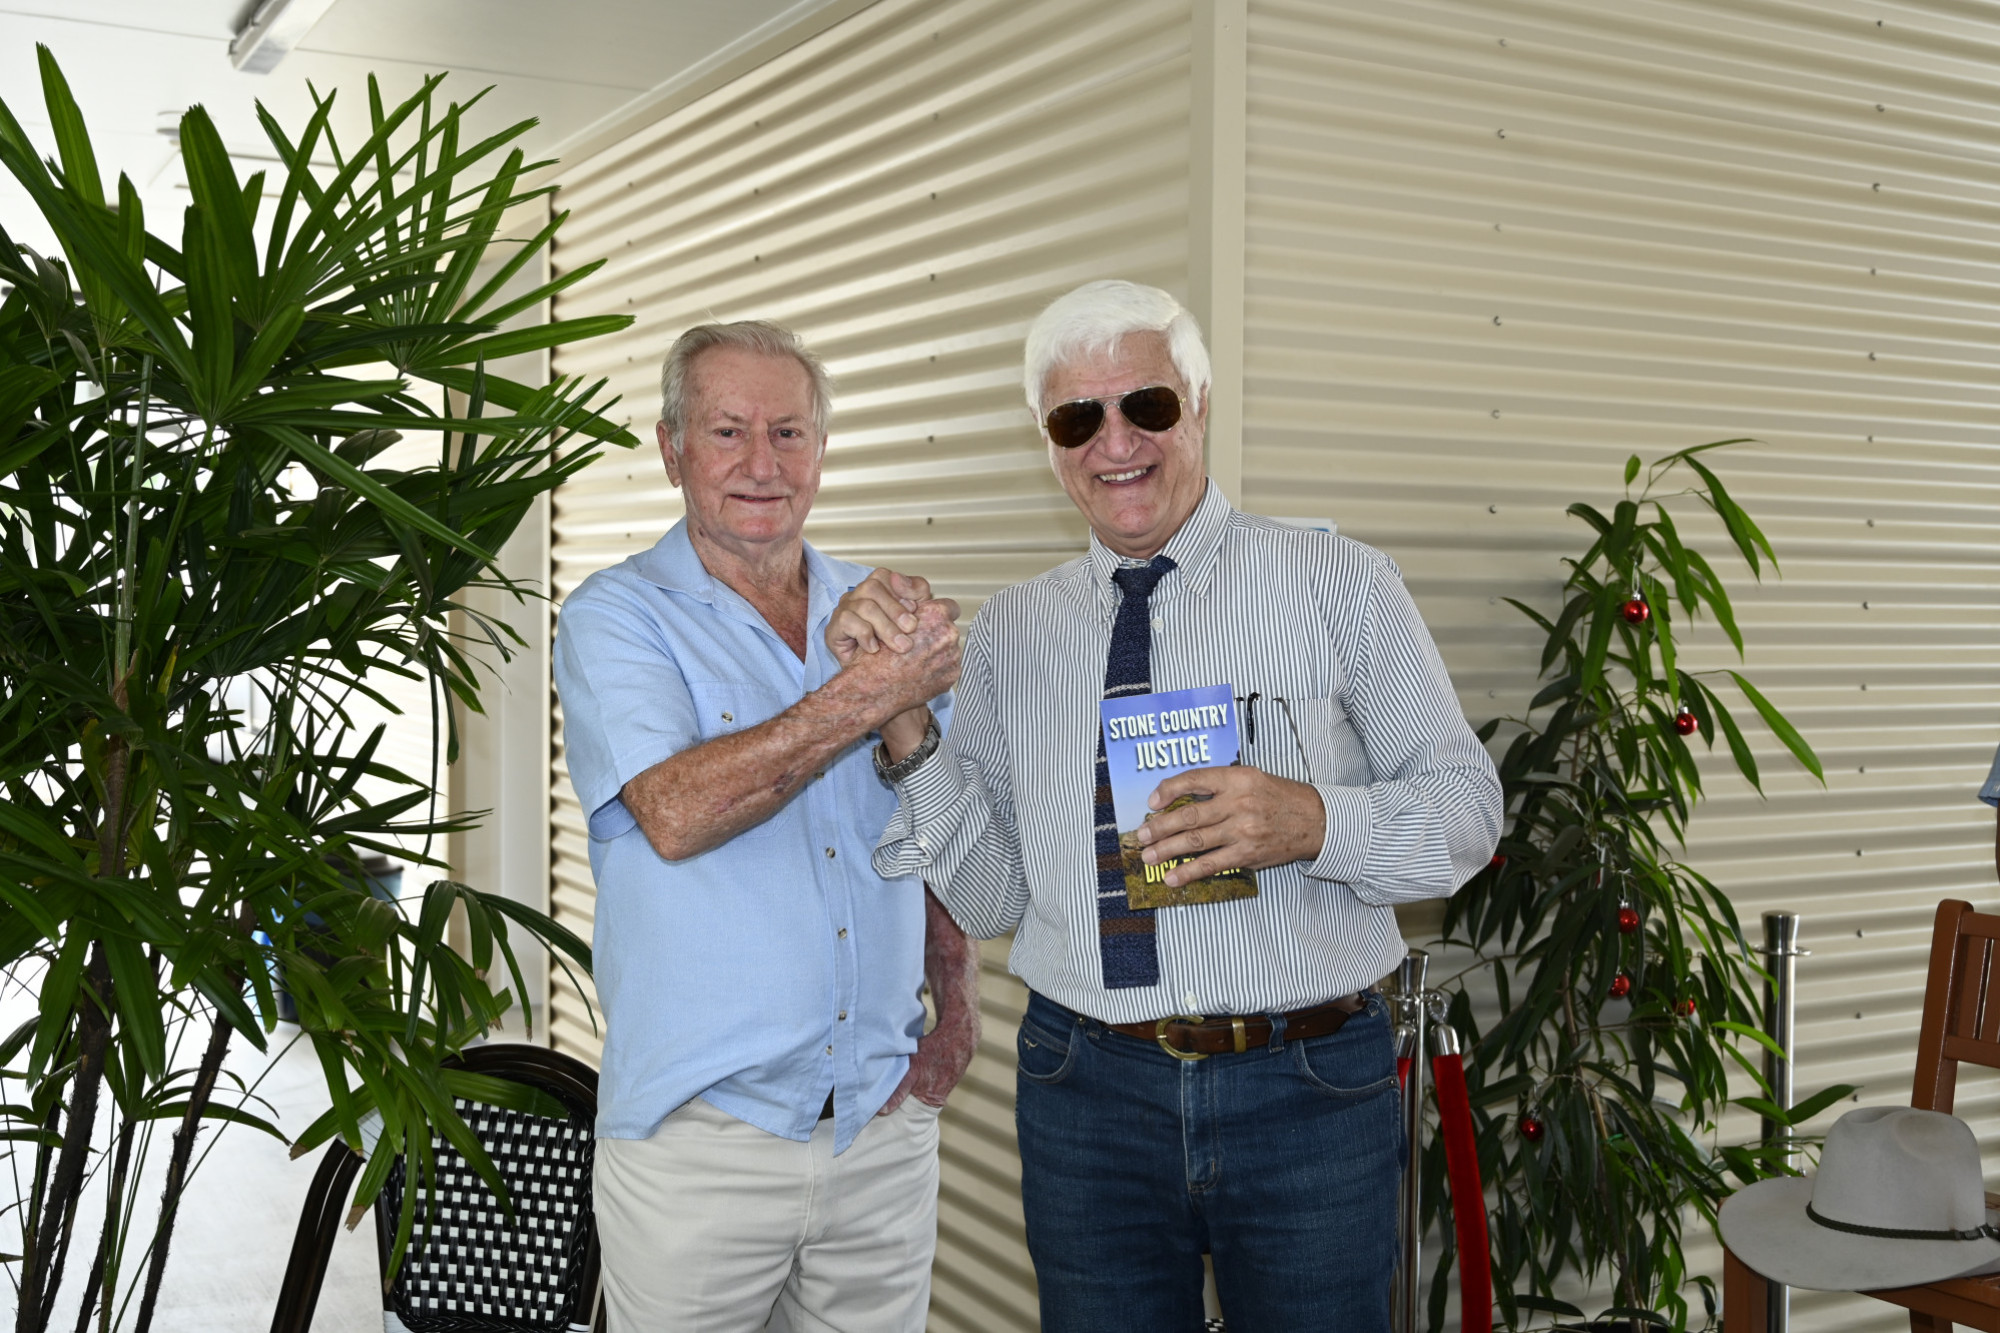 NEW BOOK: Mareeba-based writer Dick Eussen held his official book launch last Tuesday, December 15 for his first fiction book which was attended by friends, family and Federal Member for Kennedy Bob Katter